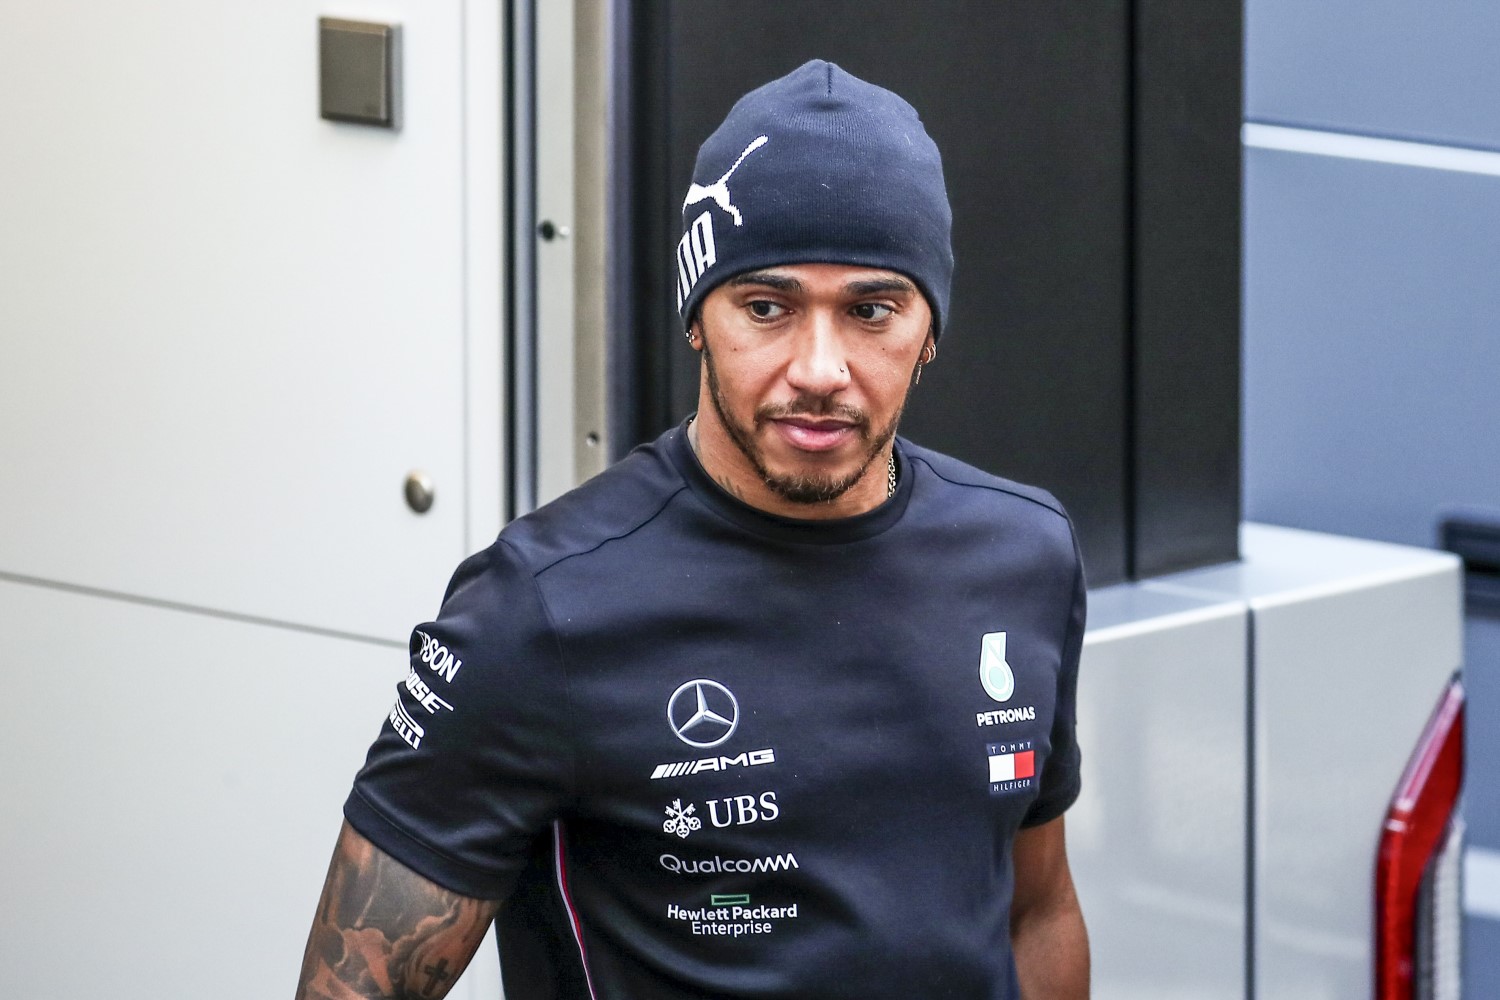 Hamilton says no switch, but if Ferrari continues to beat Mercedes his song may soon change